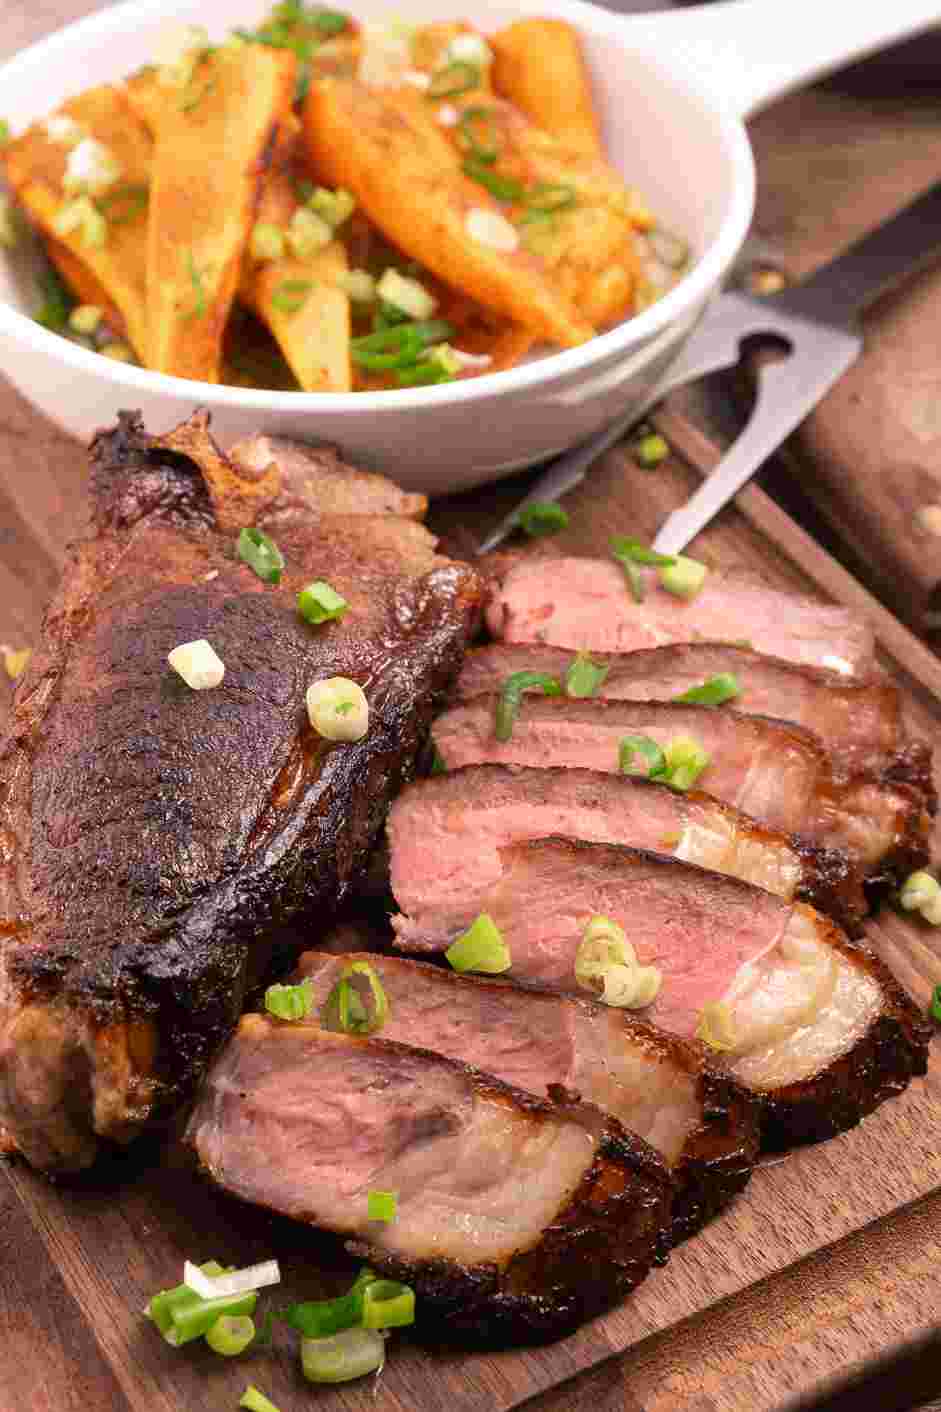 Asian Steak Marinade Recipe: Garnish the carrots with scallions and serve immediately.